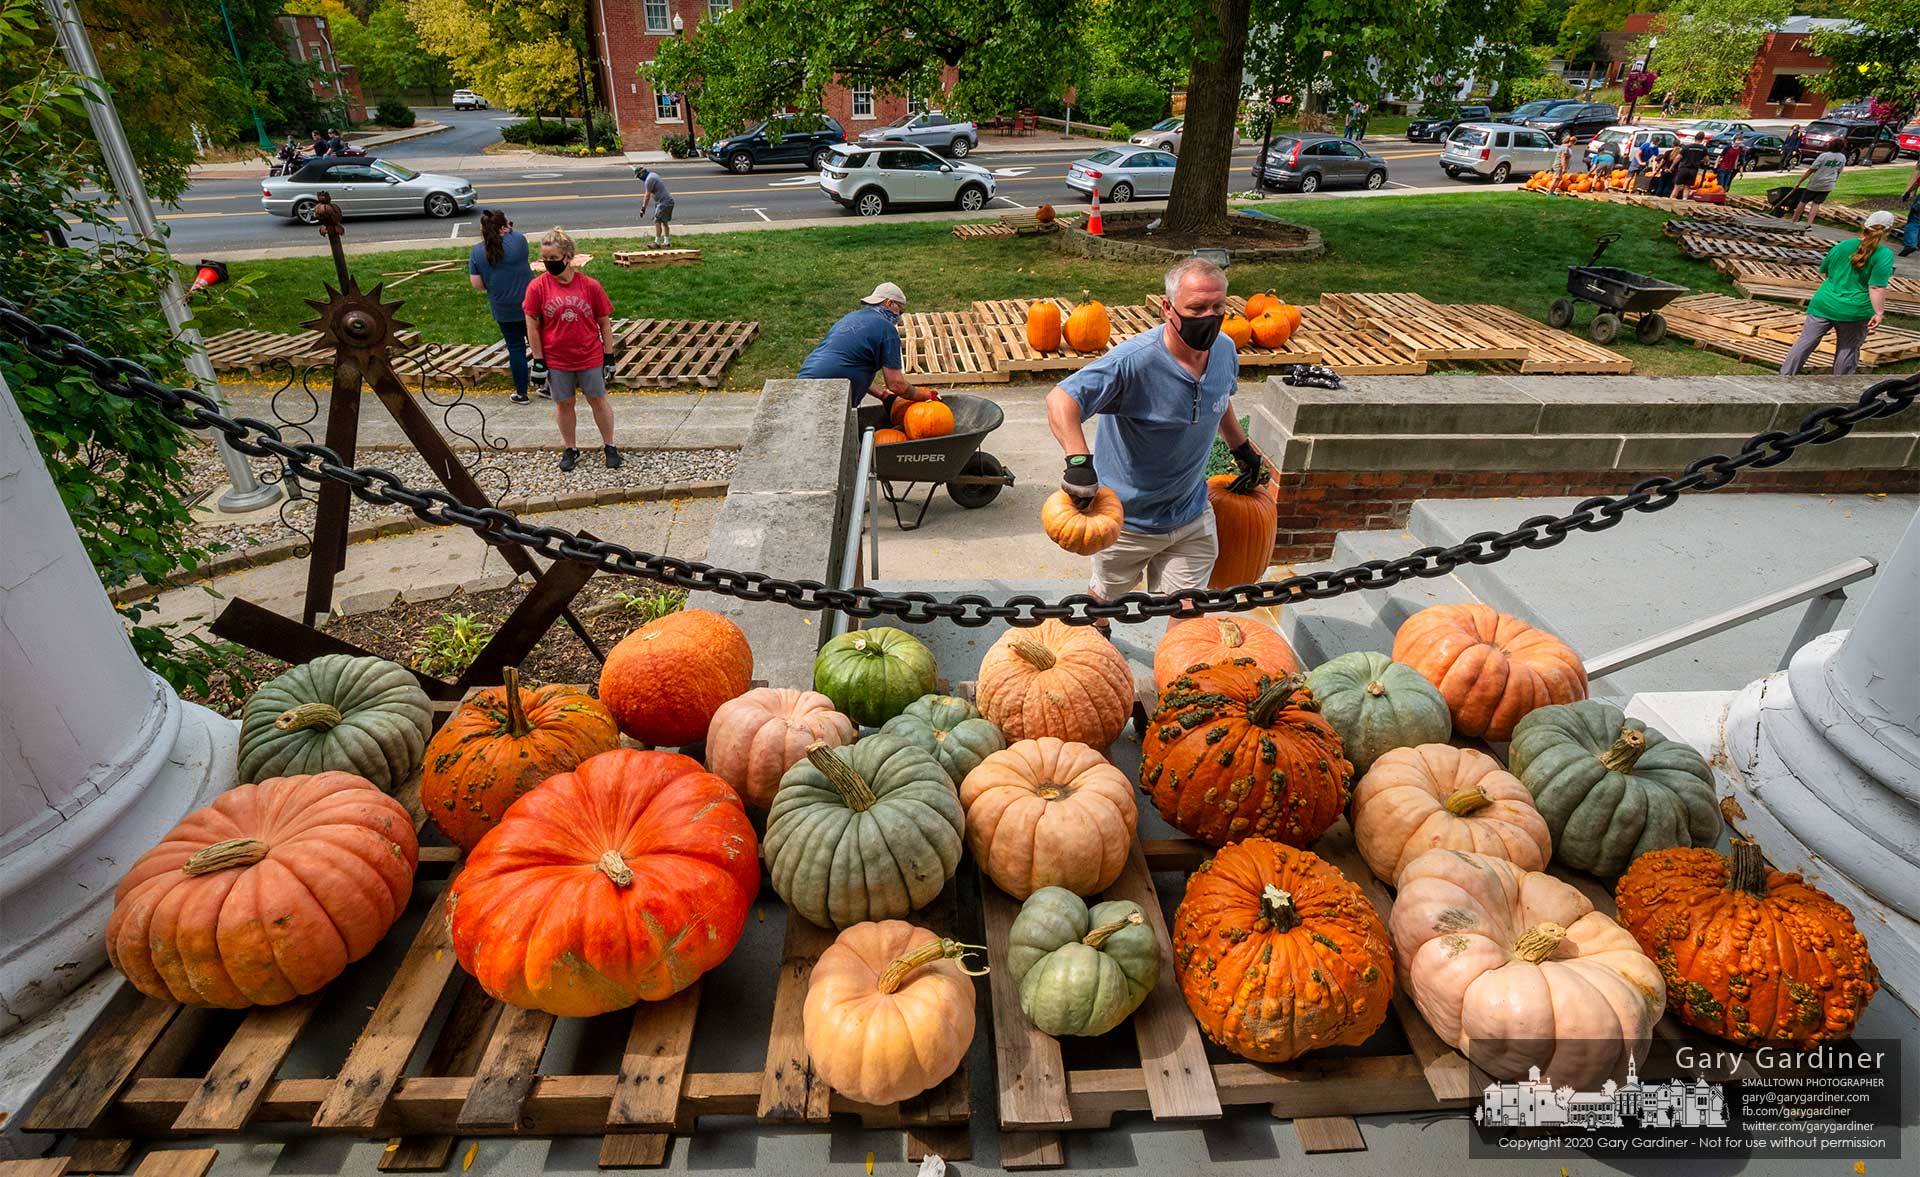 Boy Scouts and volunteers move a tractor-trailer of pumpkins into their best display locations for sale at the scout troop's annual pumpkin patch sale at the Masonic Hall on South State Street. My Final Photo for Sept. 26, 2020.